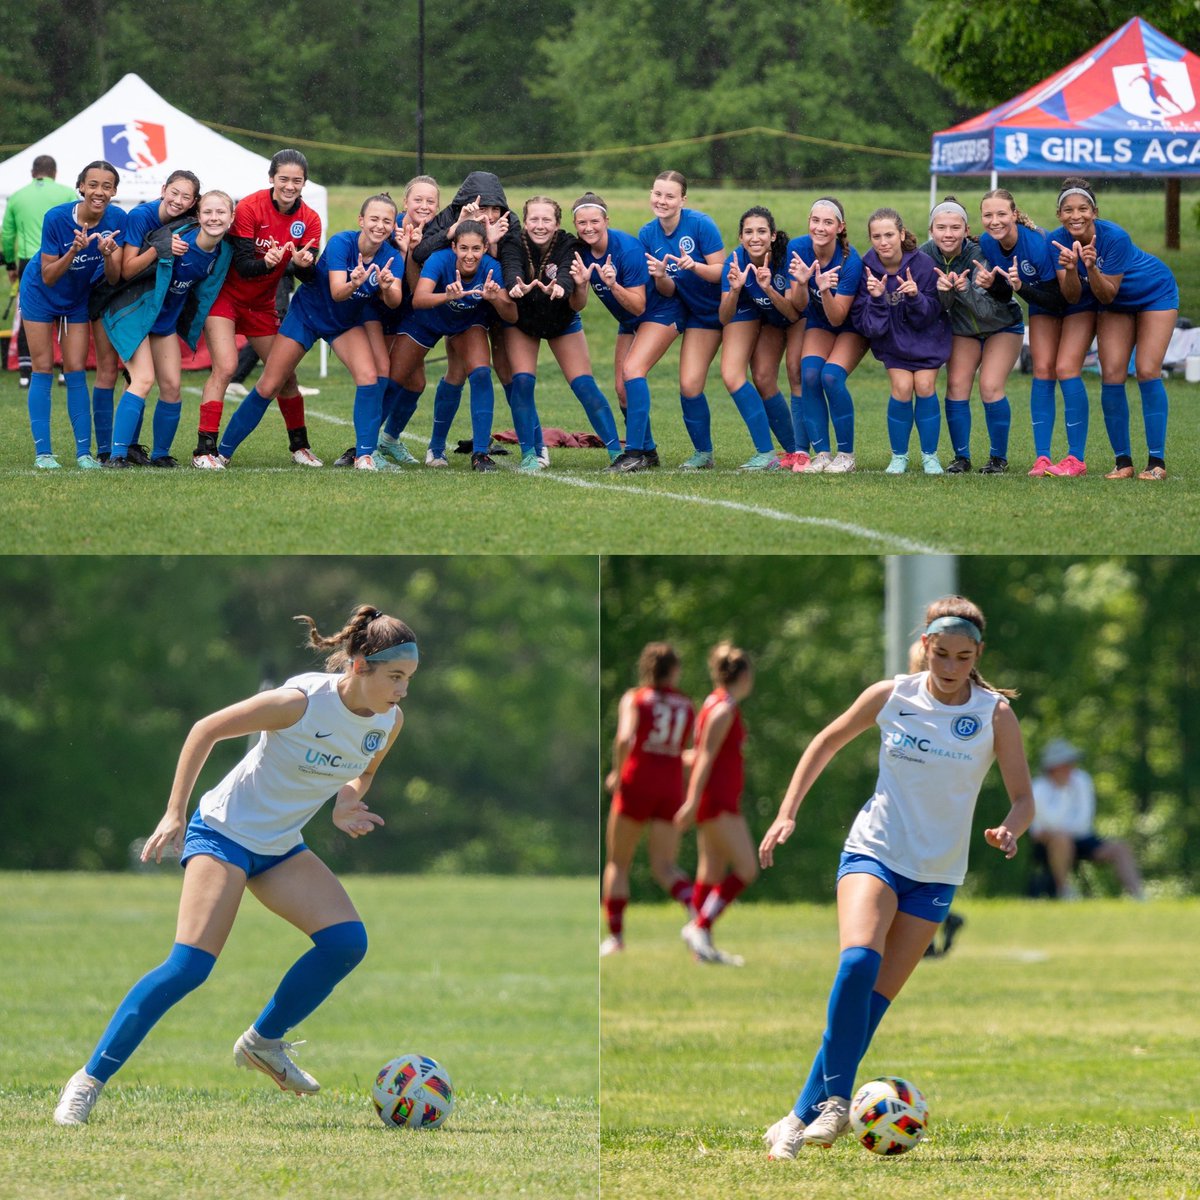 Thanks to the 60+ coaches that came to watch us play at the #GAspring Showcase! Next stop CA in June!

#thewakefcway #outsideback #midfielder #dualfooted #classof2027 @WakeFC2008GA @GAcademyLeague @TopDrawerSoccer @TheSoccerWire @PrepSoccer @SoccerMomInt @ImYouthSoccer